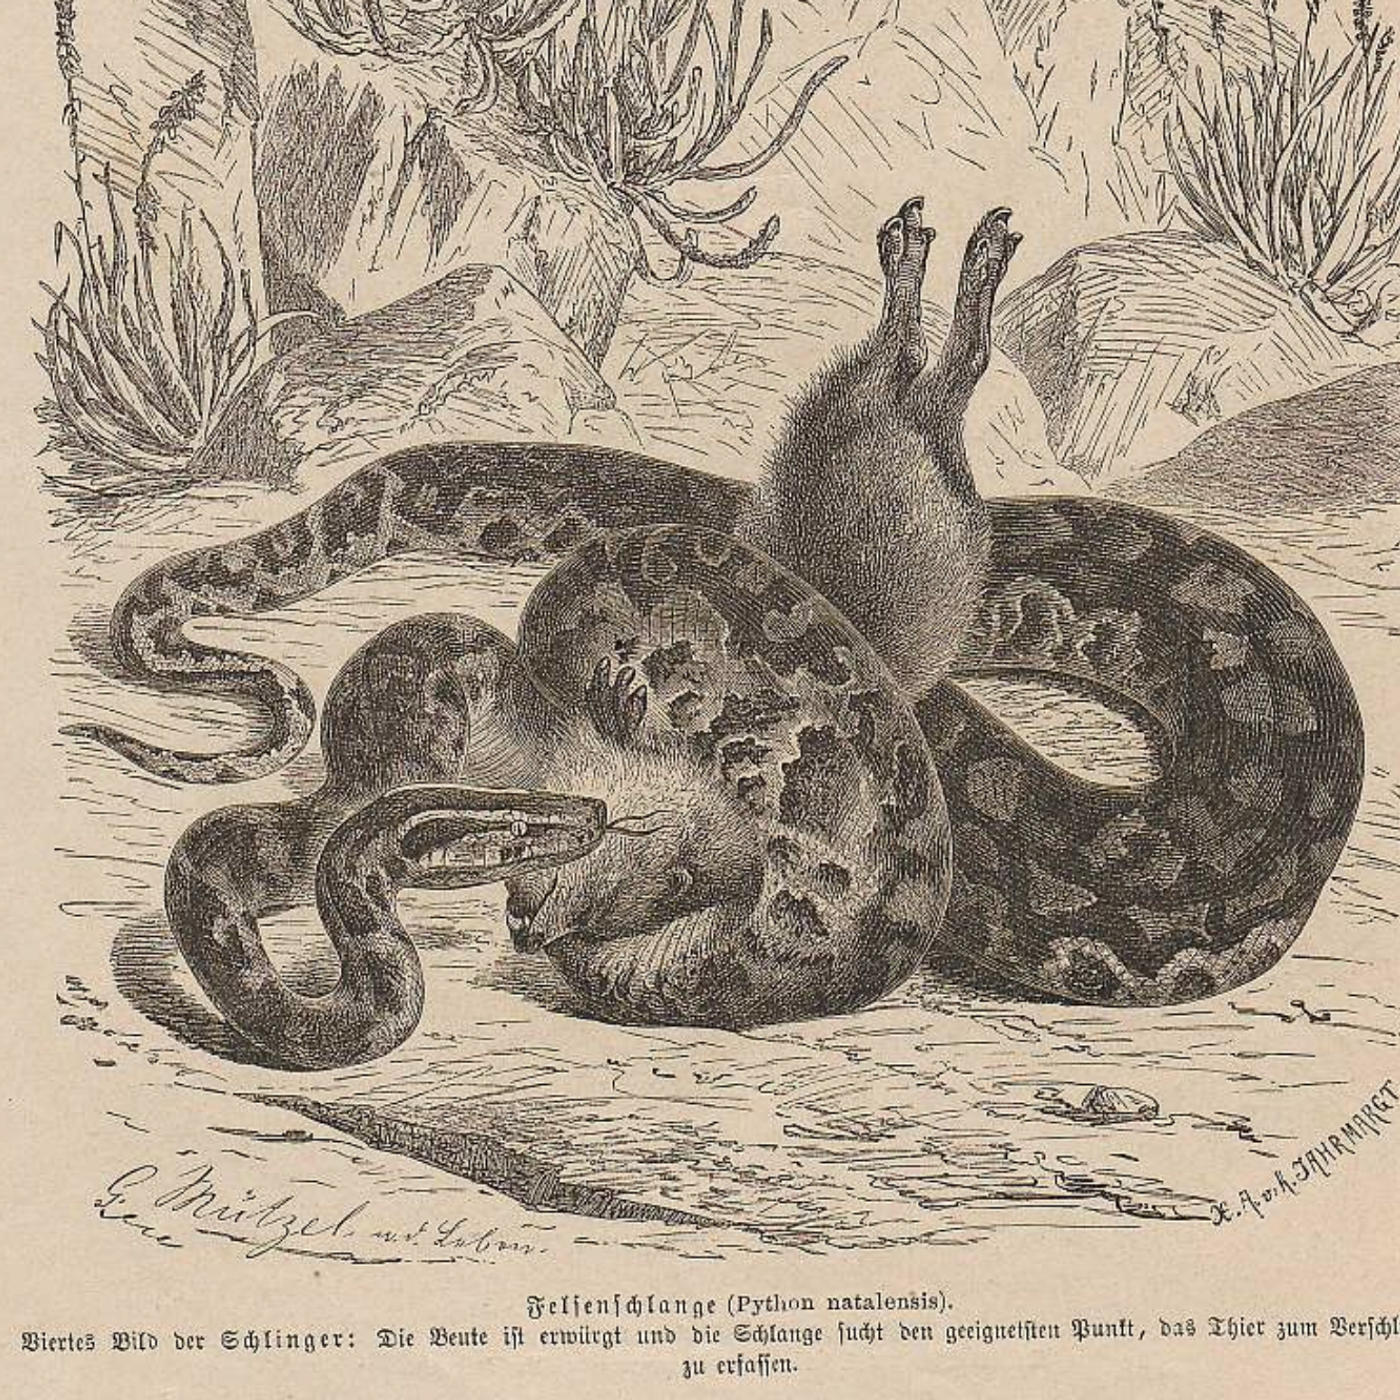 #OzWatch: Snakes awake early: hungry, aggressive and unpredictable.  Jeremy Zakis, New South Wales. #FriendsofHistoryDebatingSociety